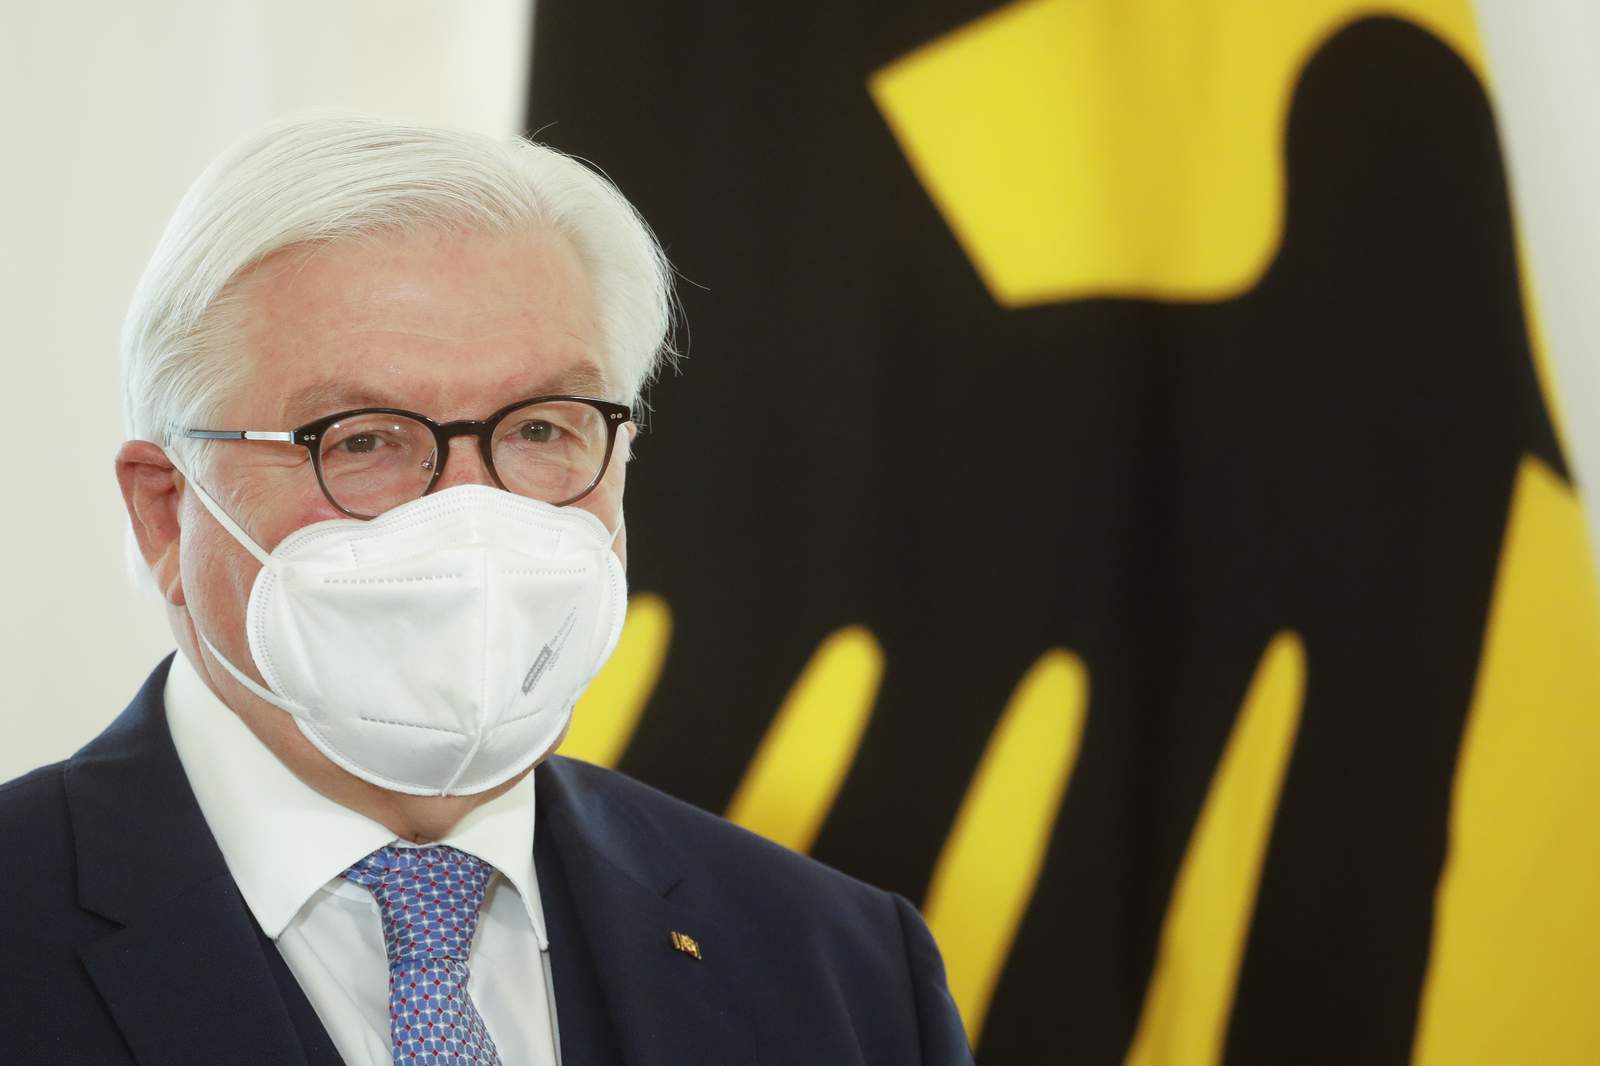 Germany faces 'crisis of trust' in pandemic, president says